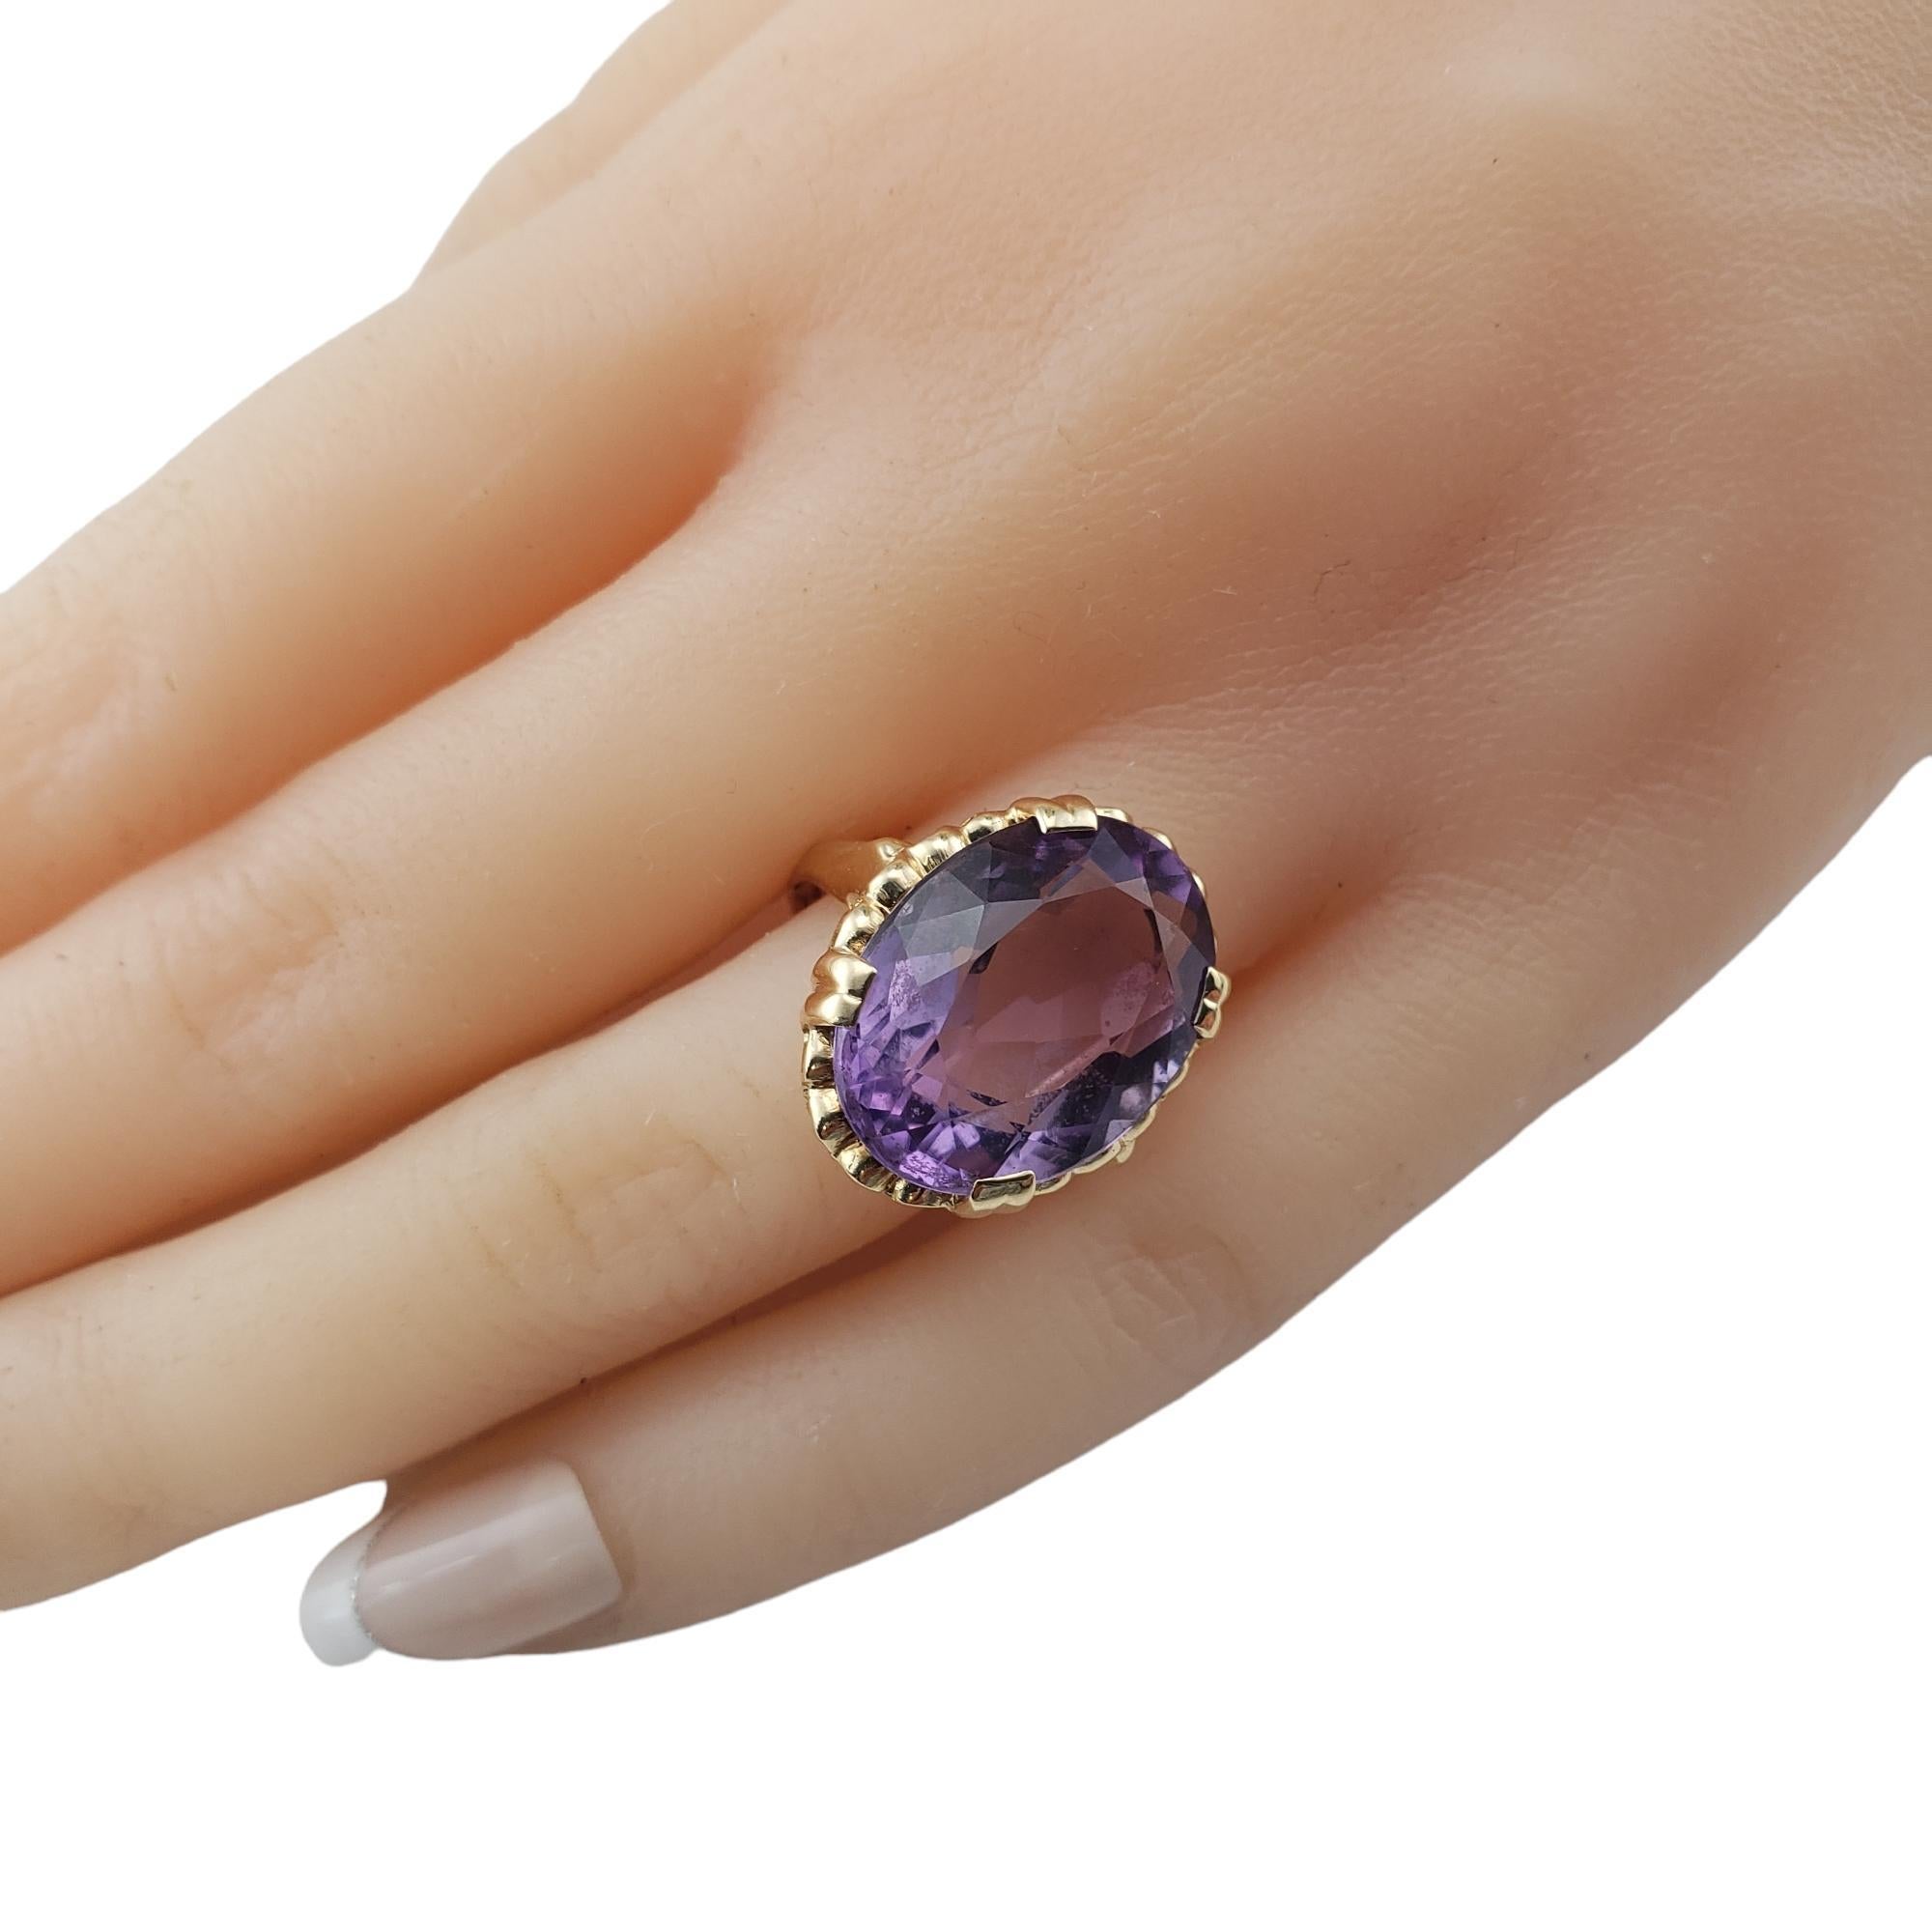  14K Yellow Gold Amethyst Ring Size 6.75 #15468 For Sale 3